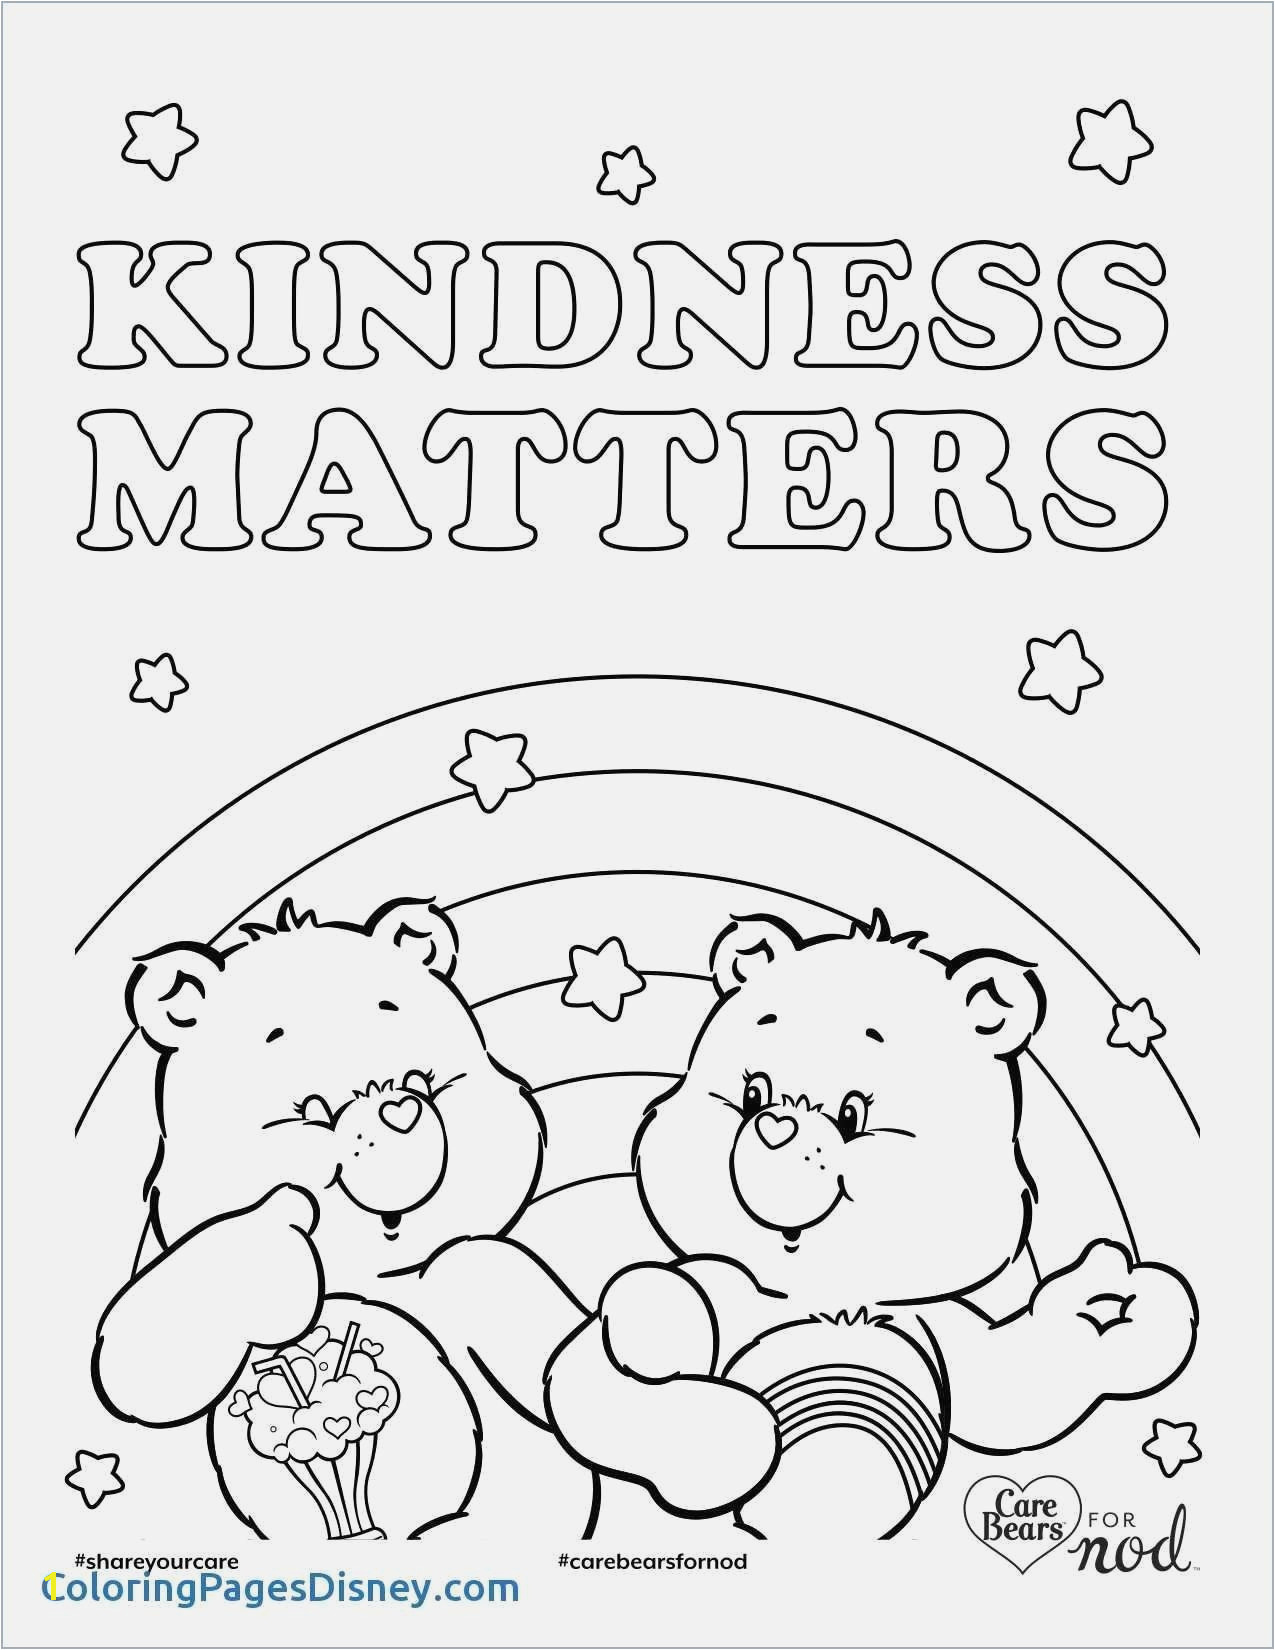 Friendship Coloring Pages Printable Fnaf Coloring Pages New 18 Inspirational Fnaf Coloring Pages Friendship Coloring